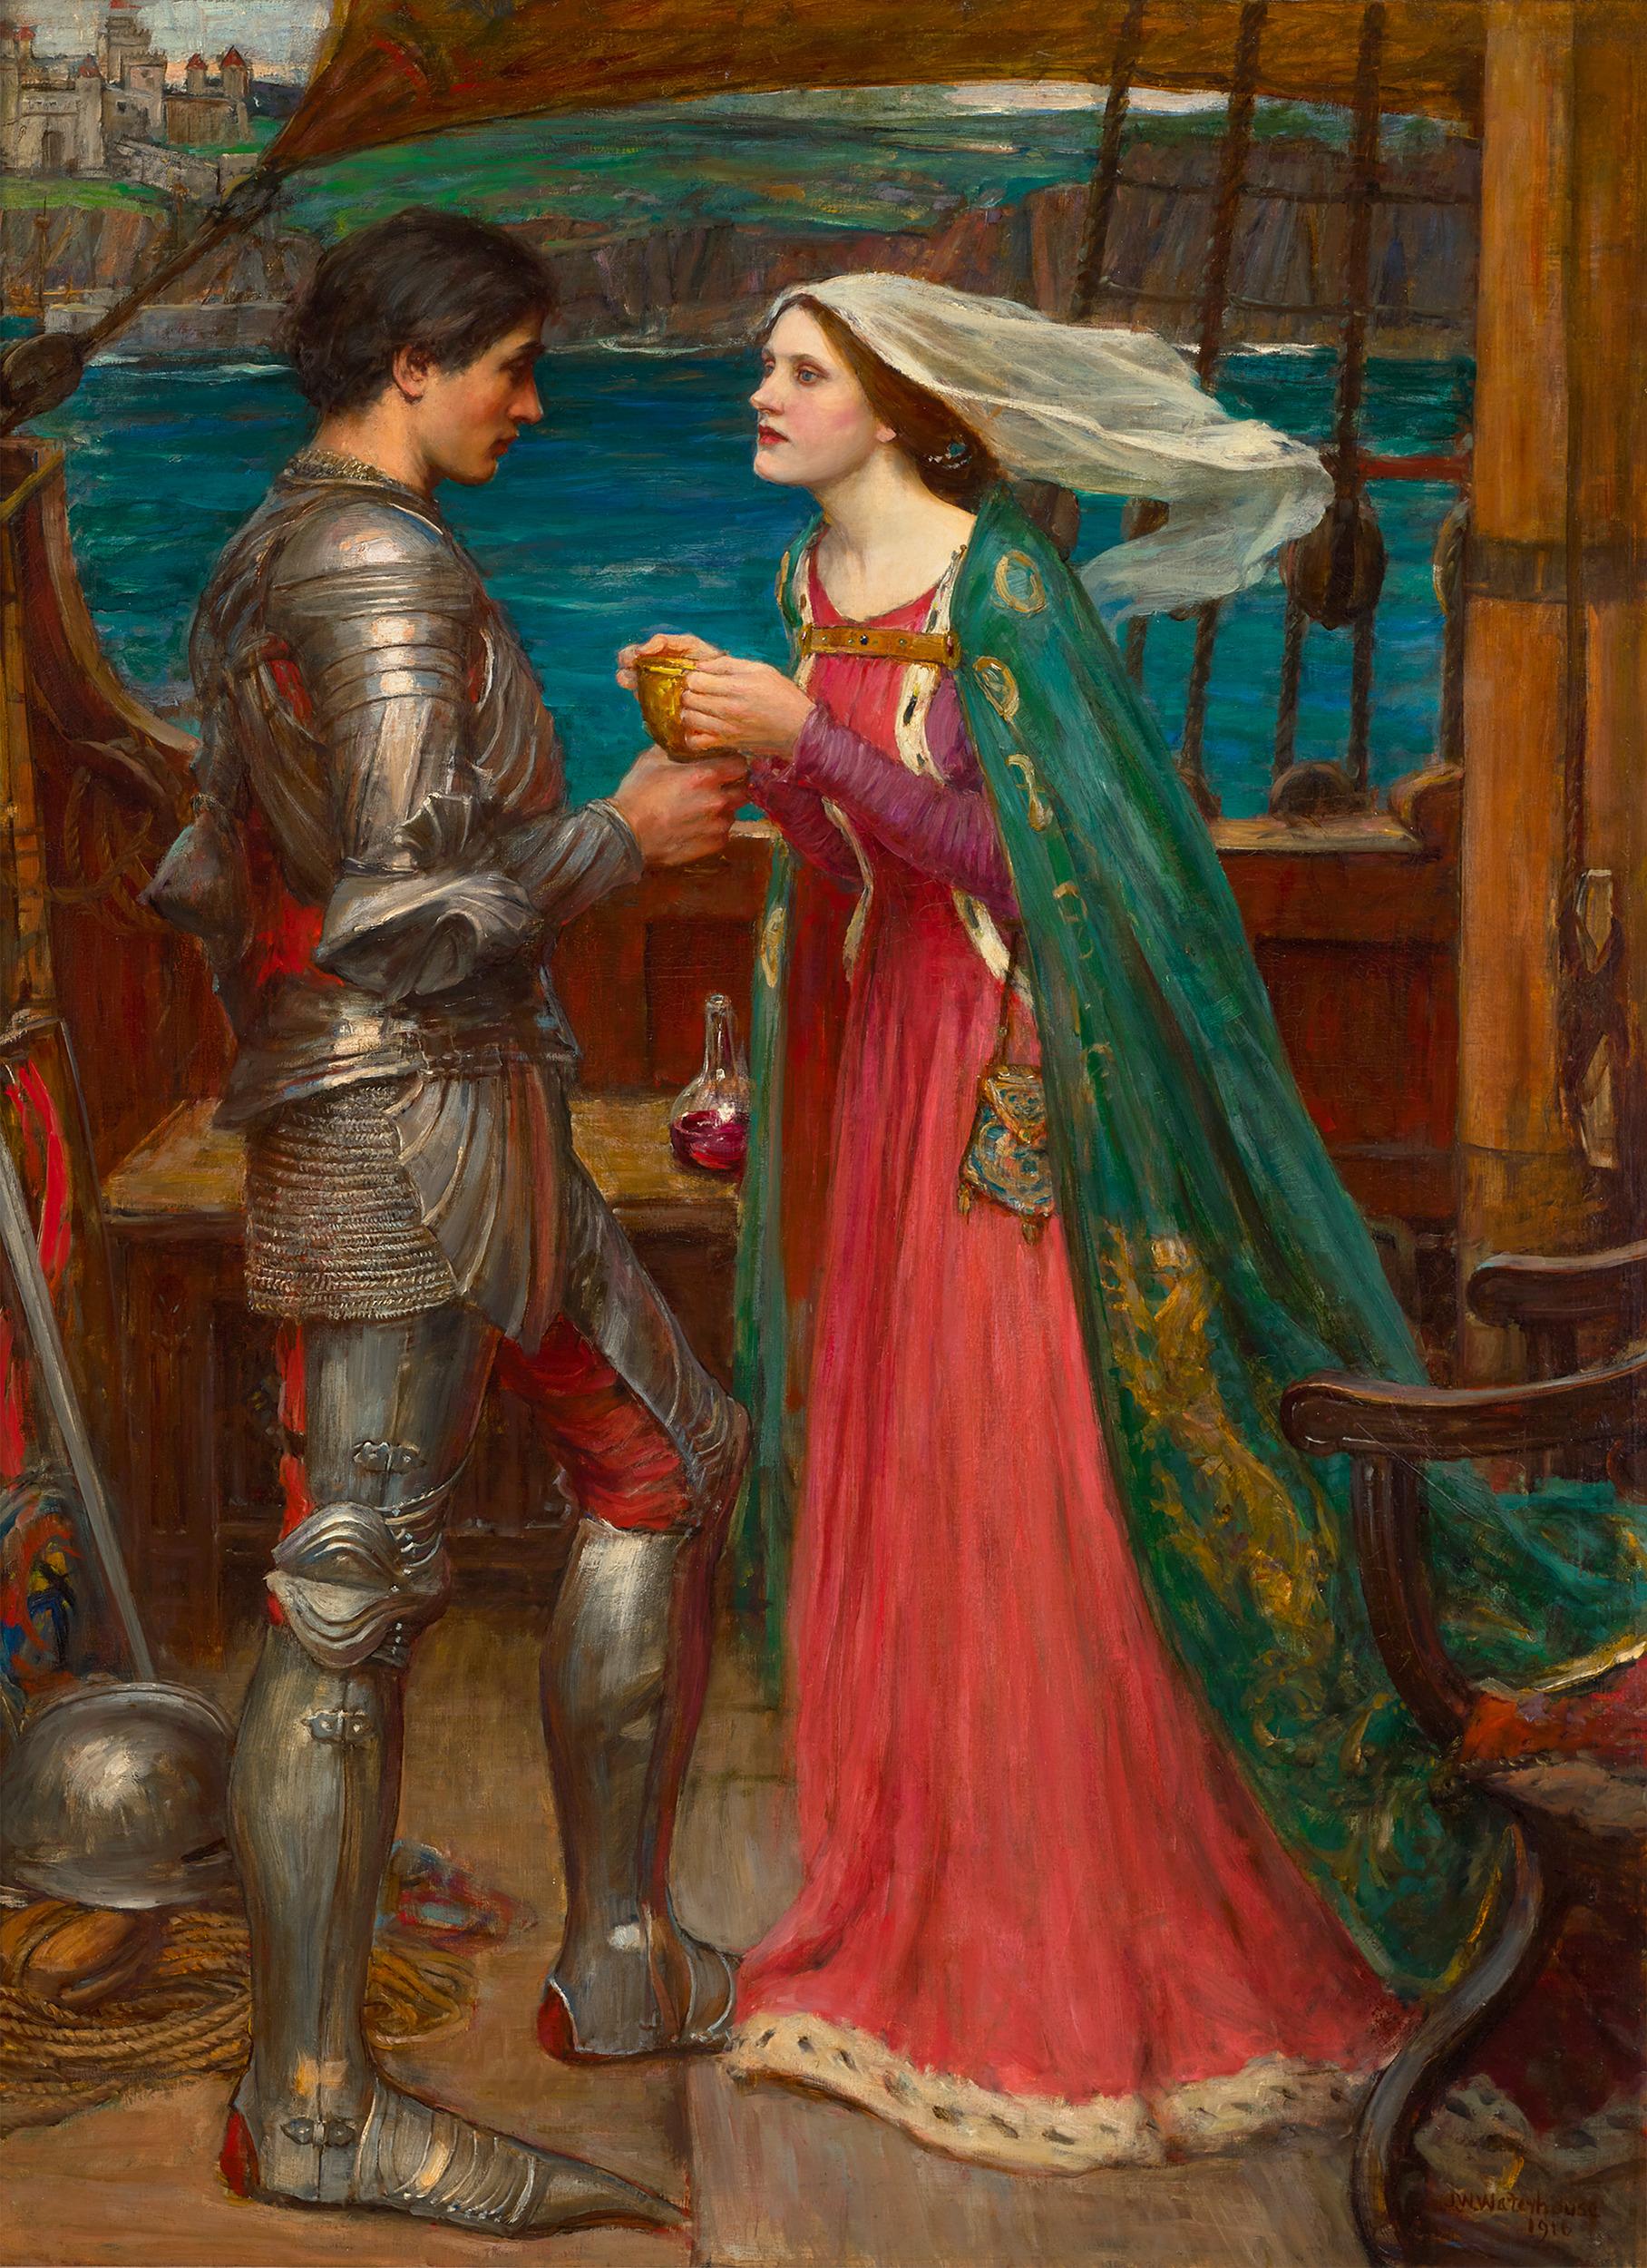 John William Waterhouse, R.A.
1849-1917 I British

Tristram and Isolde

Signed and dated “J.W. Waterhouse/1916” (lower left)
Oil on canvas

The Pre-Raphaelites sought to perfectly render stories from literature and history with tremendous accuracy.